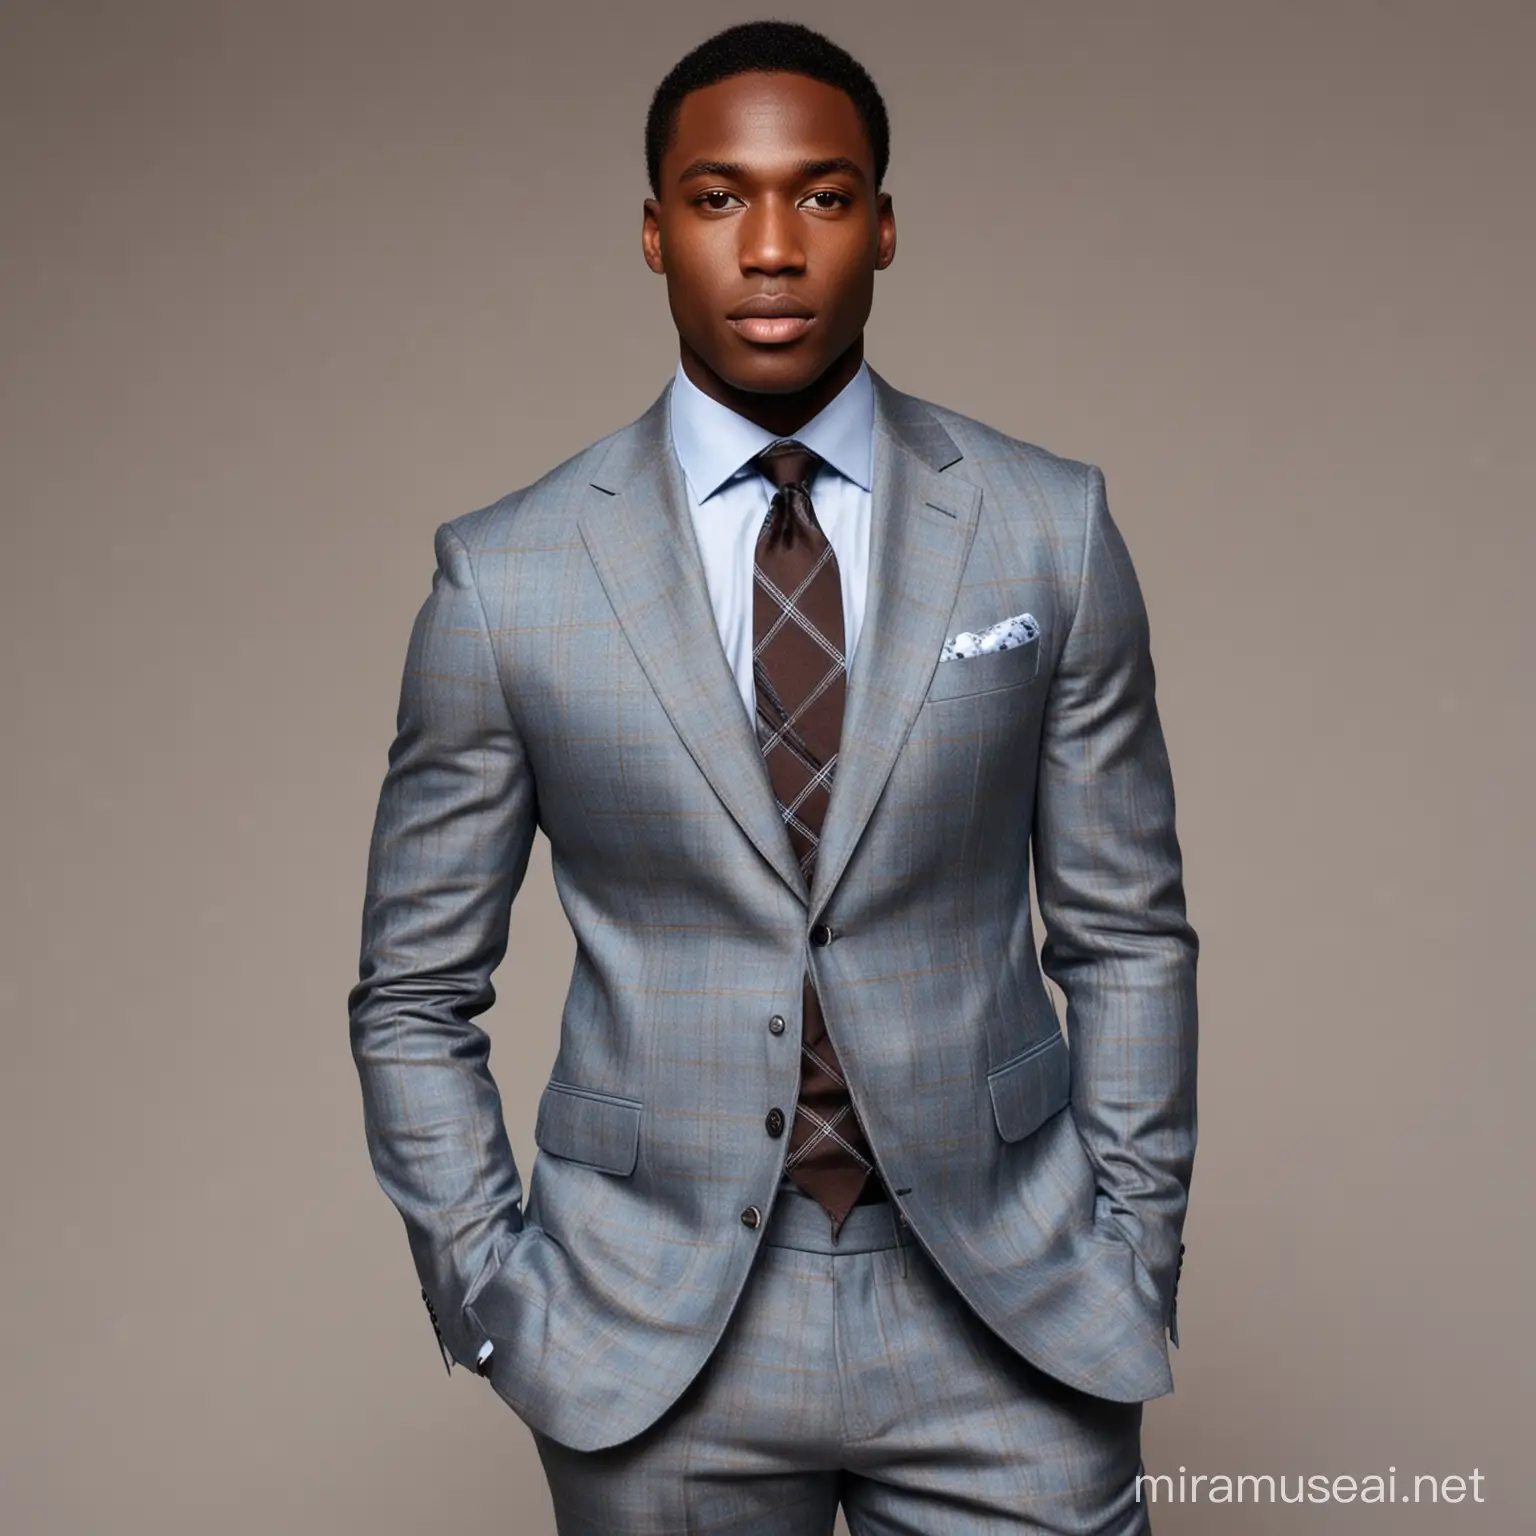 A black guy model wearing a suit. This suit is light blue with chocolate plaid. He is wearing "black silk shirt" with black silk tie. He is looking sharp